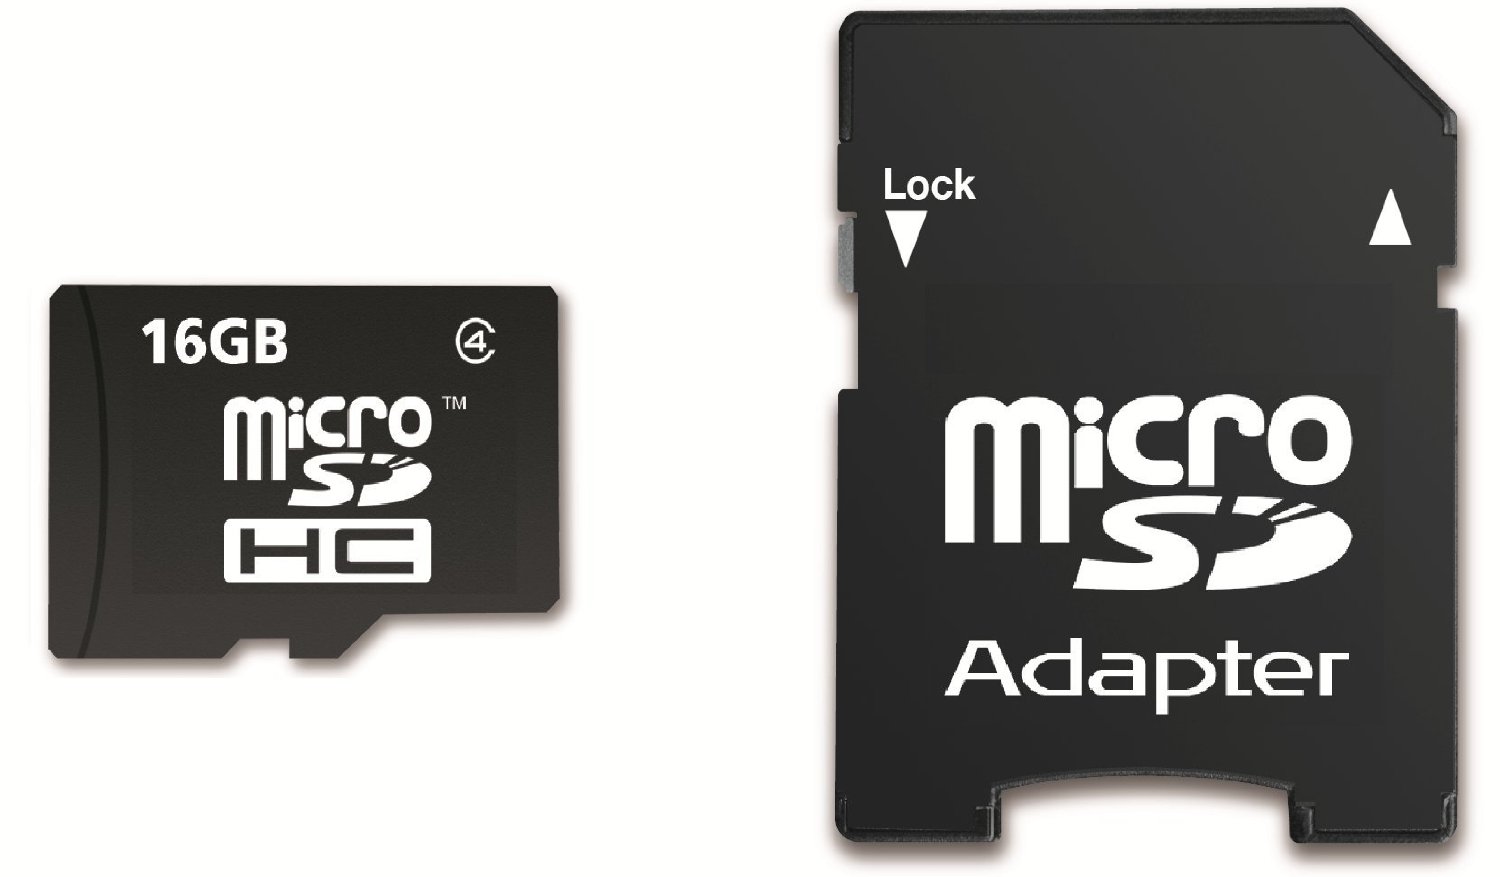 Shark 16GB Micro SDHC Memory Card with SD Adapter for Acer